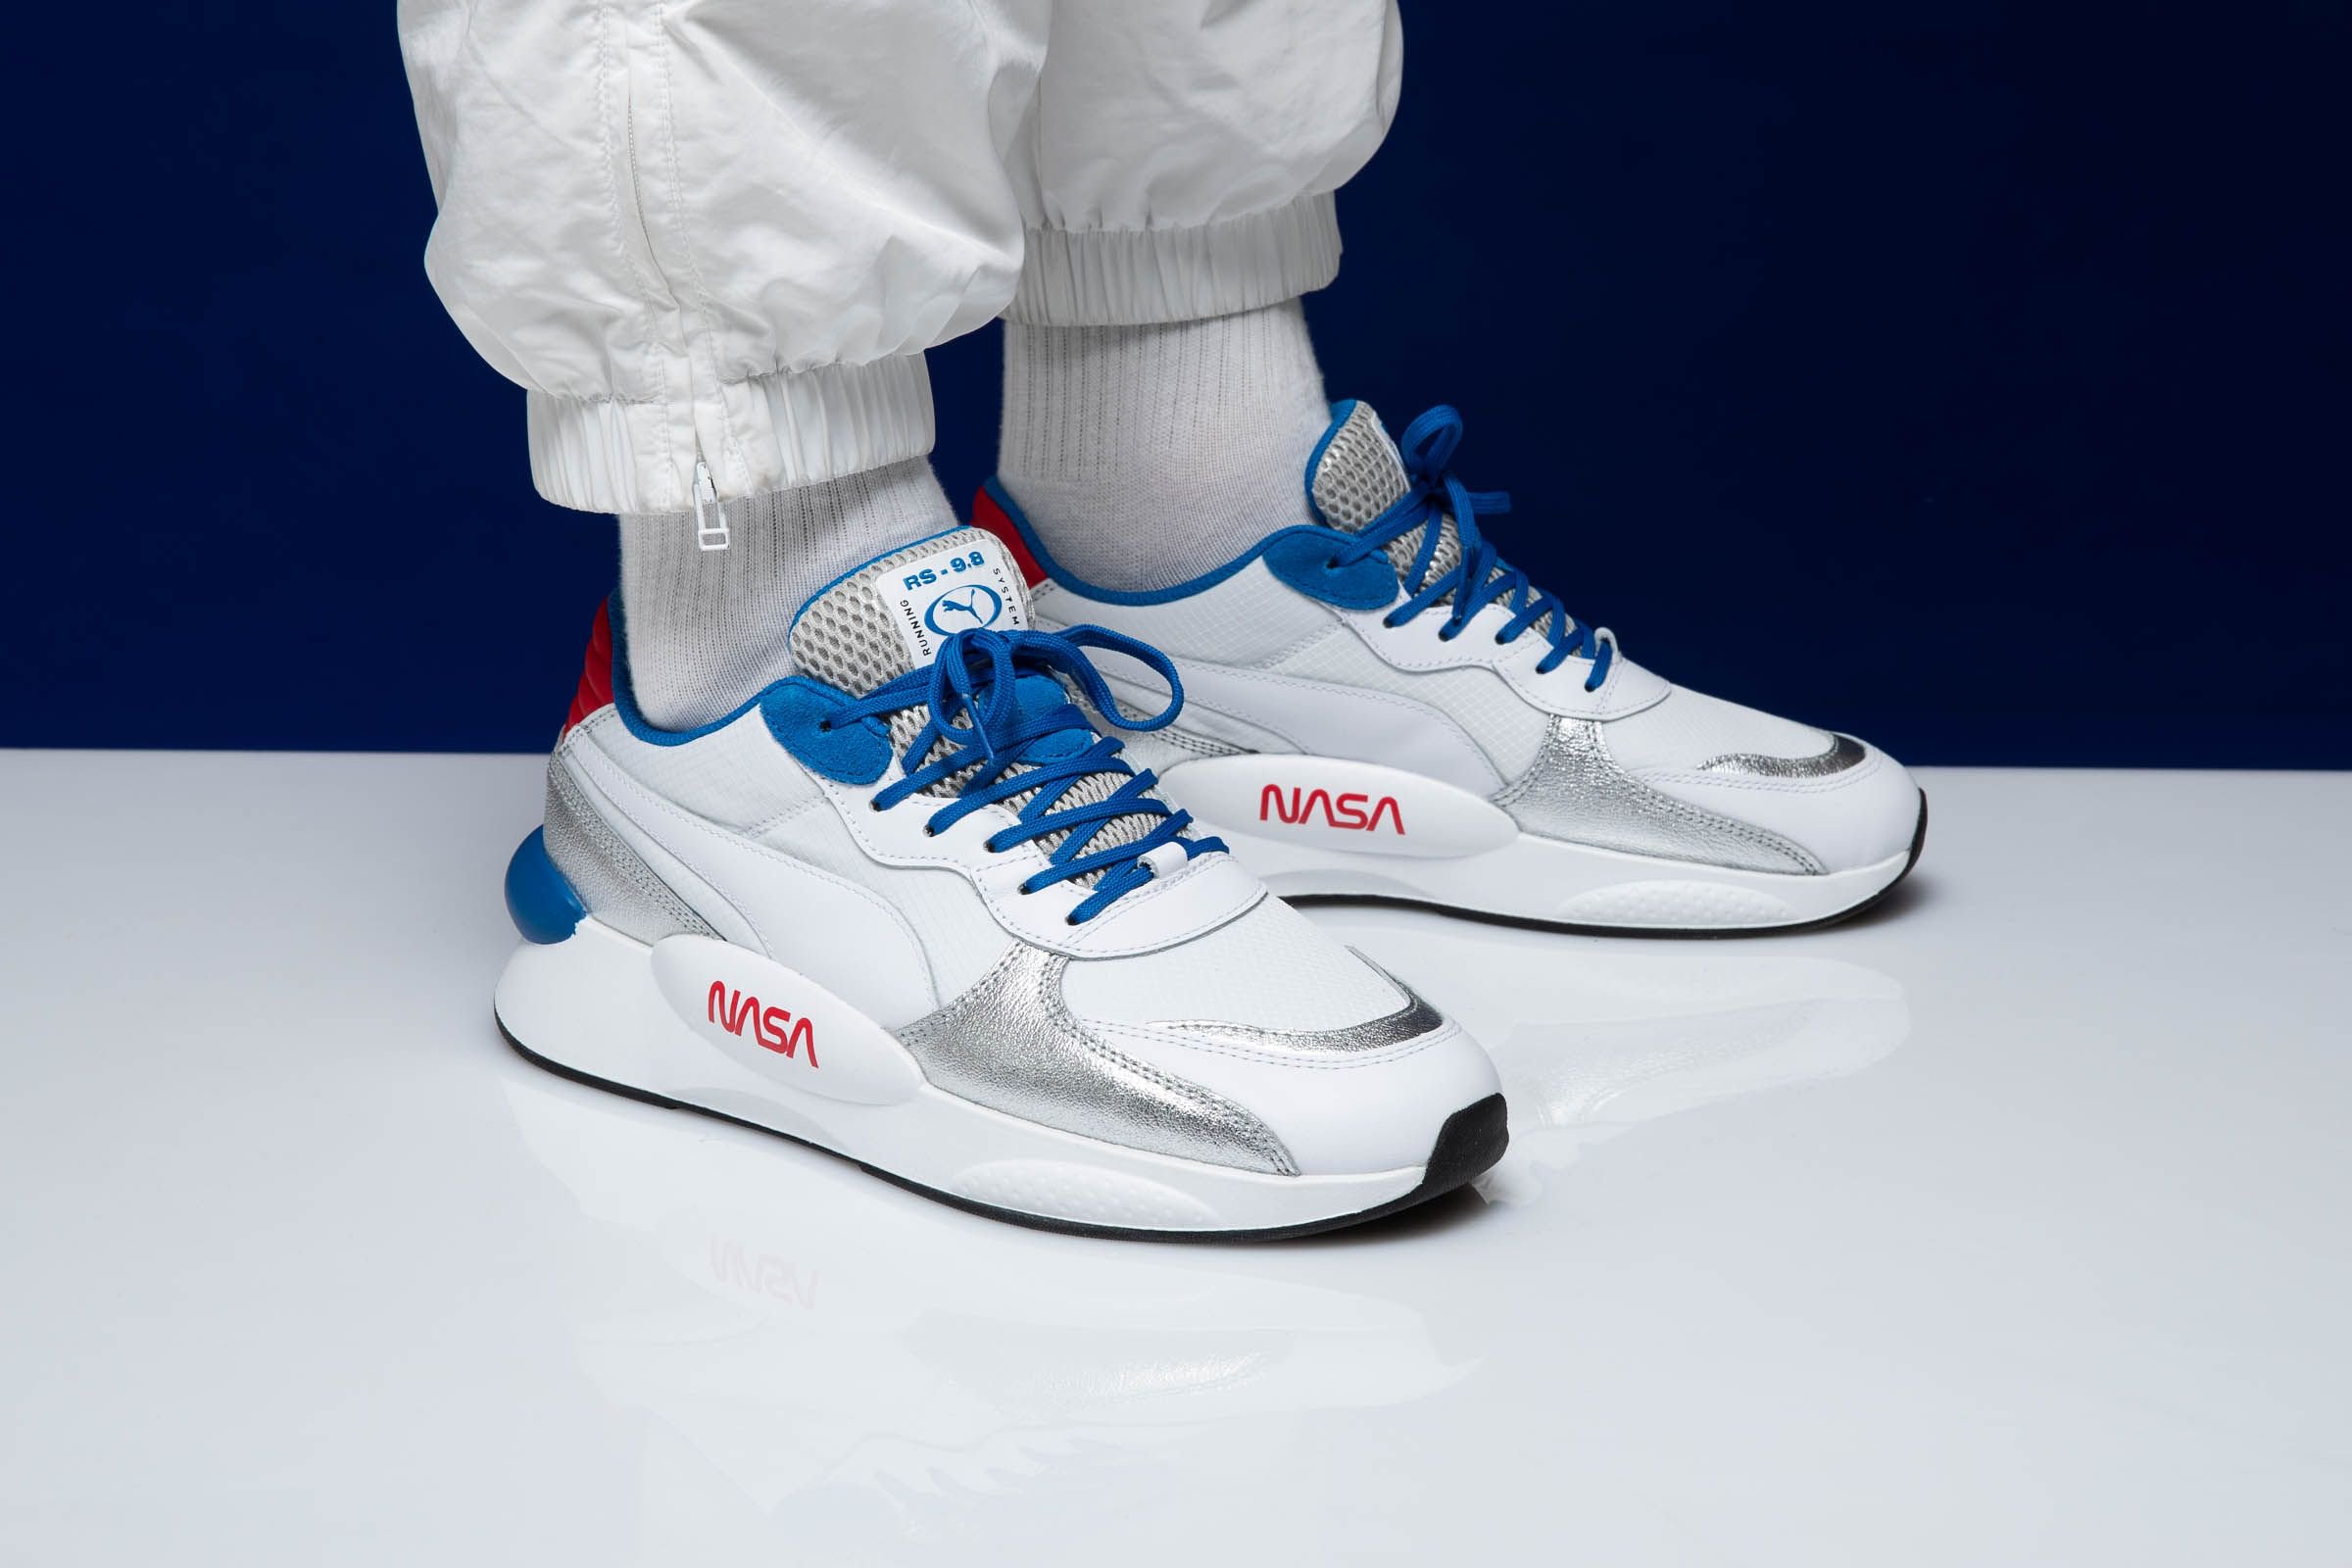 Brengen bidden Schat Titolo on Twitter: "for The Man in the Moon 🌚 Space Agency x Puma RS 9.8 " NASA" is now available online ➡️ https://t.co/KNNmo5pk6f and in store at  Titolo Zurich and Berne. UK